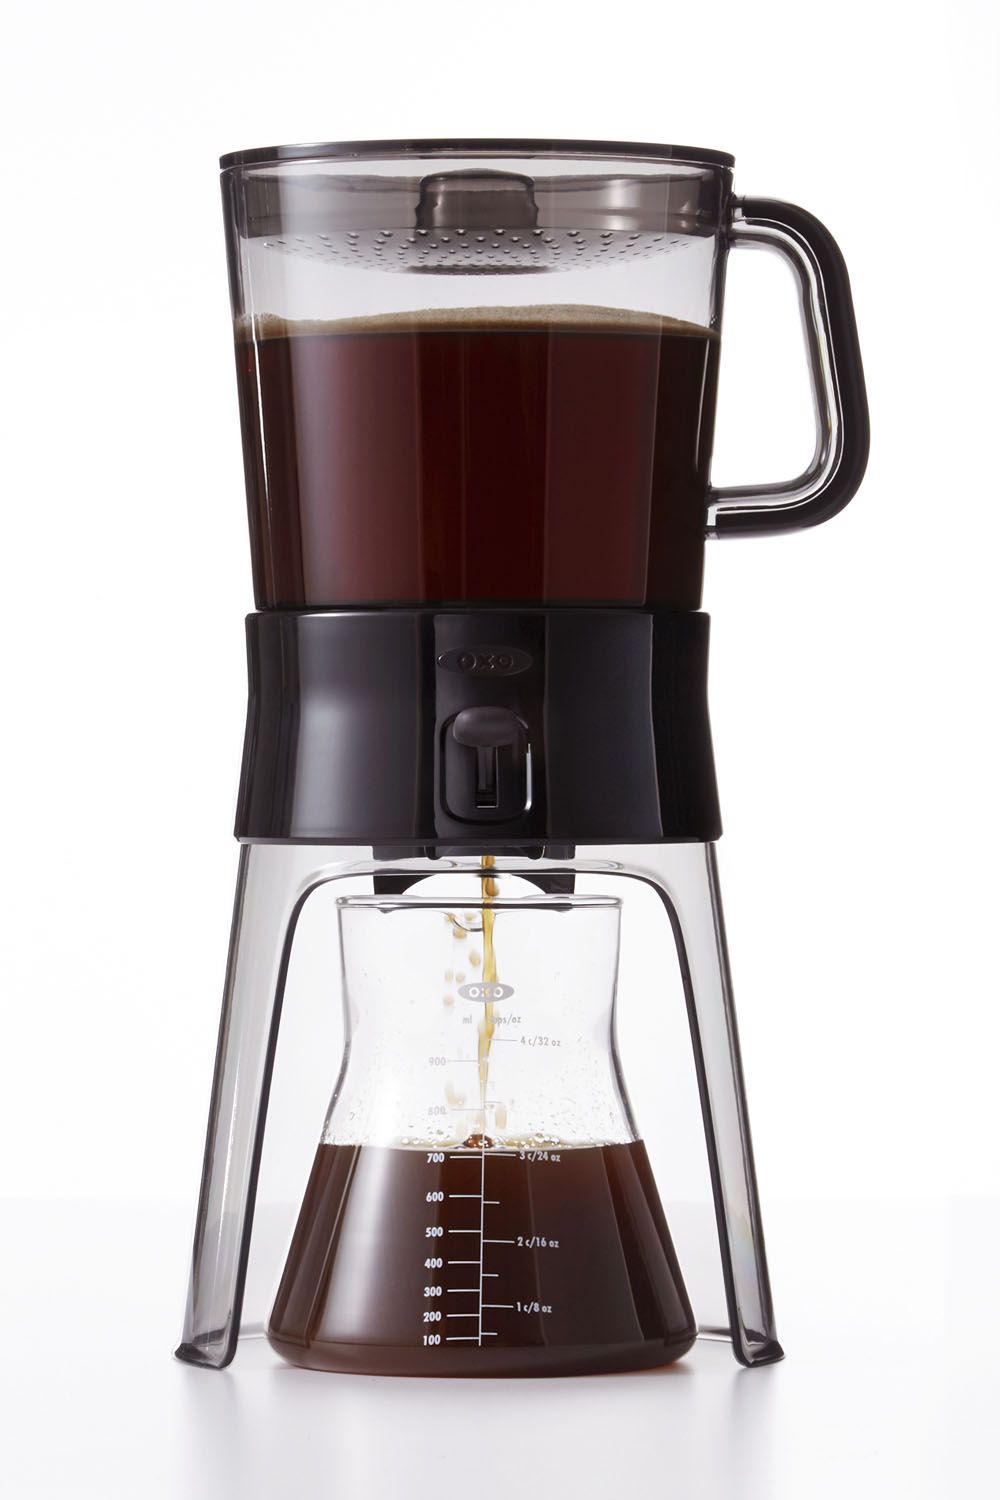 I Tried the OXO Cold Brew Coffee Maker 